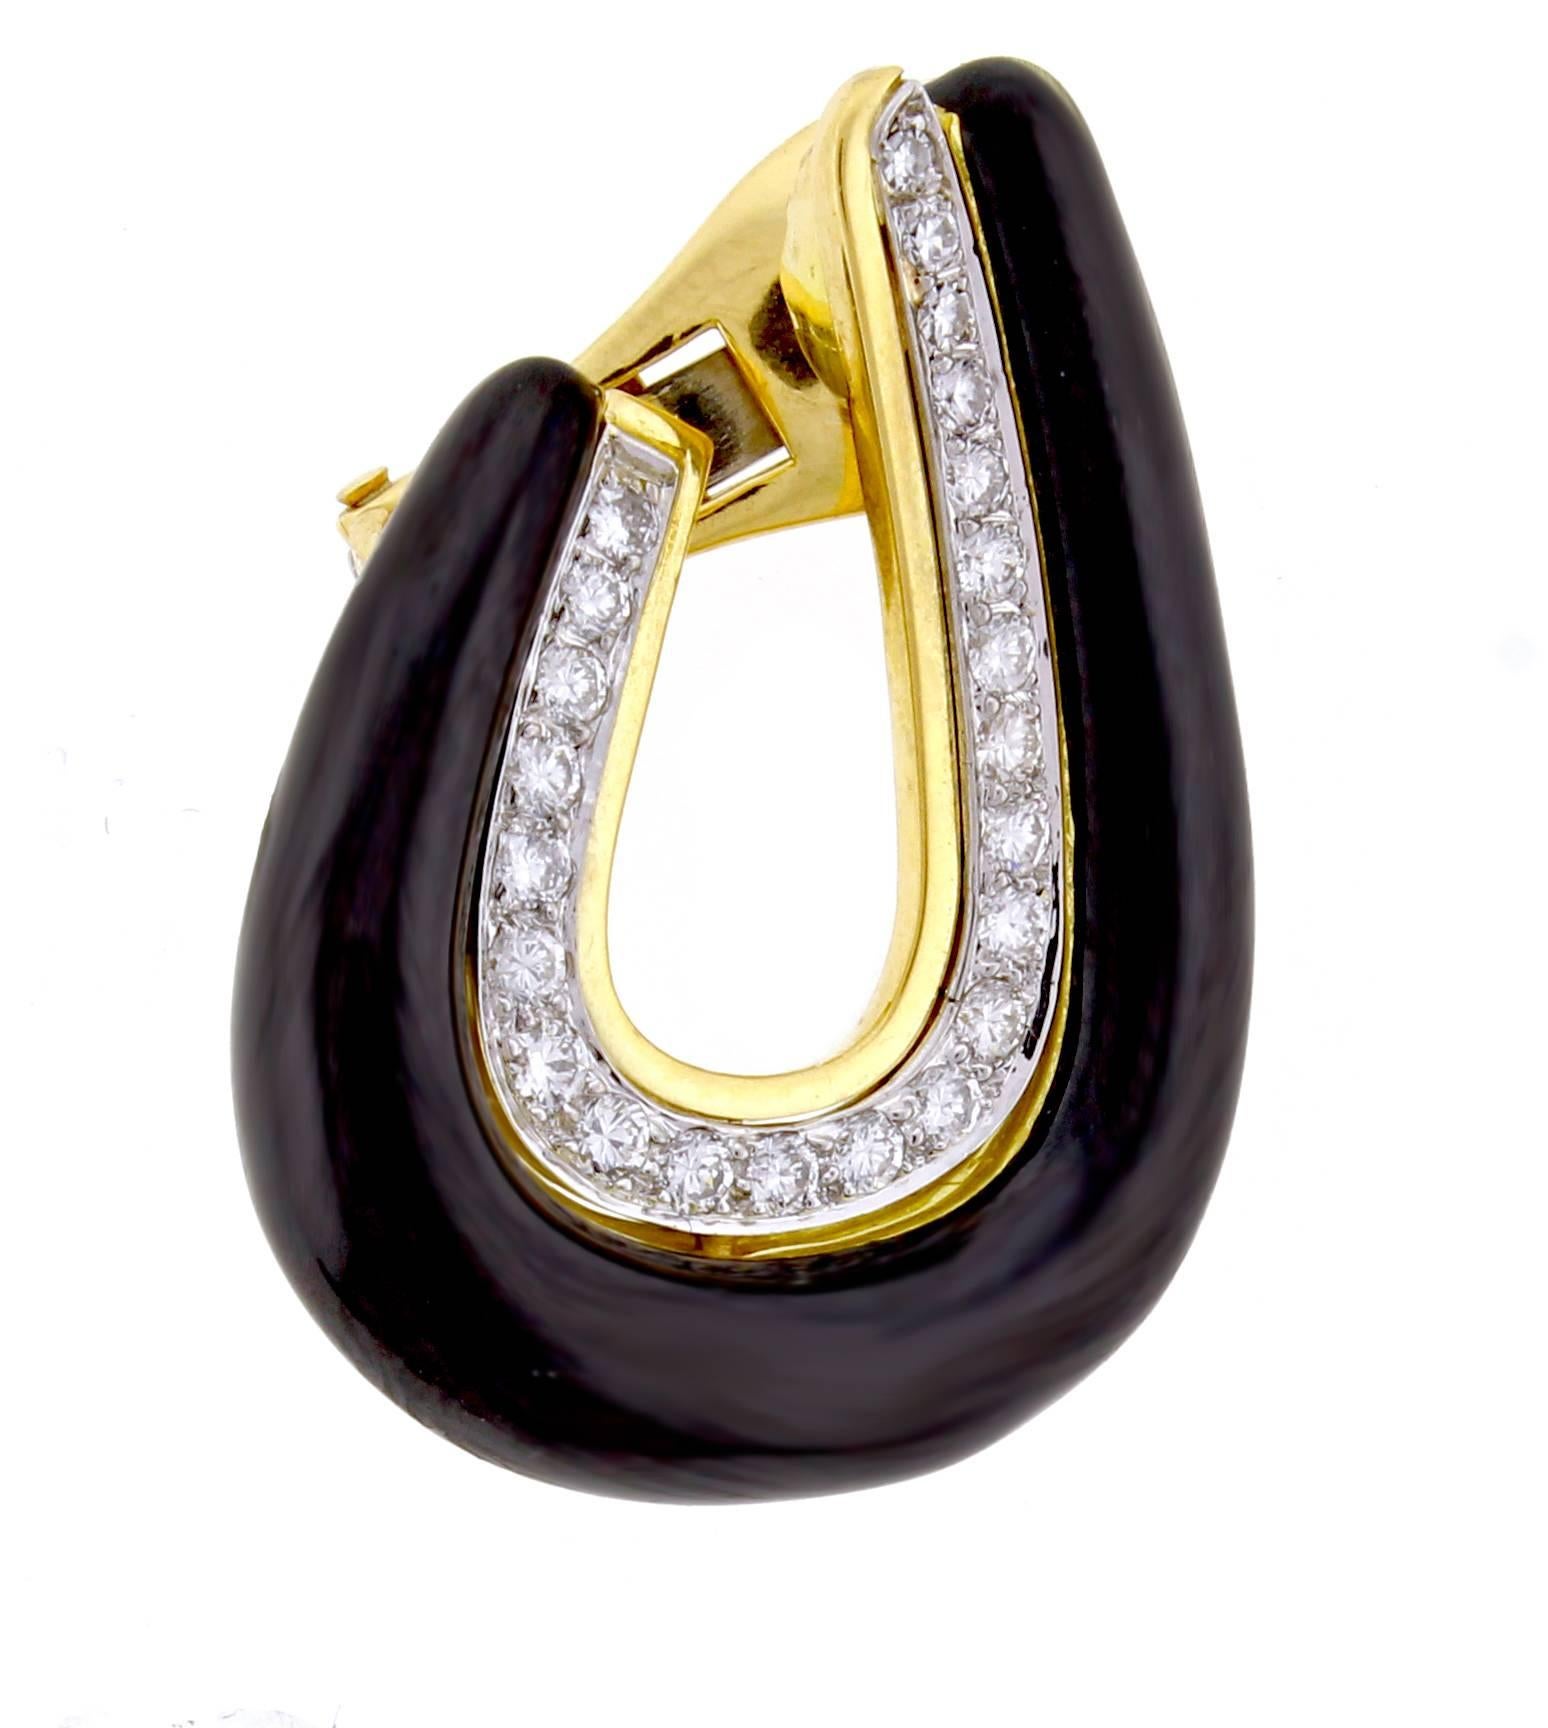 From David Webb, an impressive pair of black enamel and diamond earrings. The 18 karat earrings are comprised of 46 platinum set diamonds weighing approximately 1.25 carats.  1 1/4 inches high 5/8 of an inch wide. 